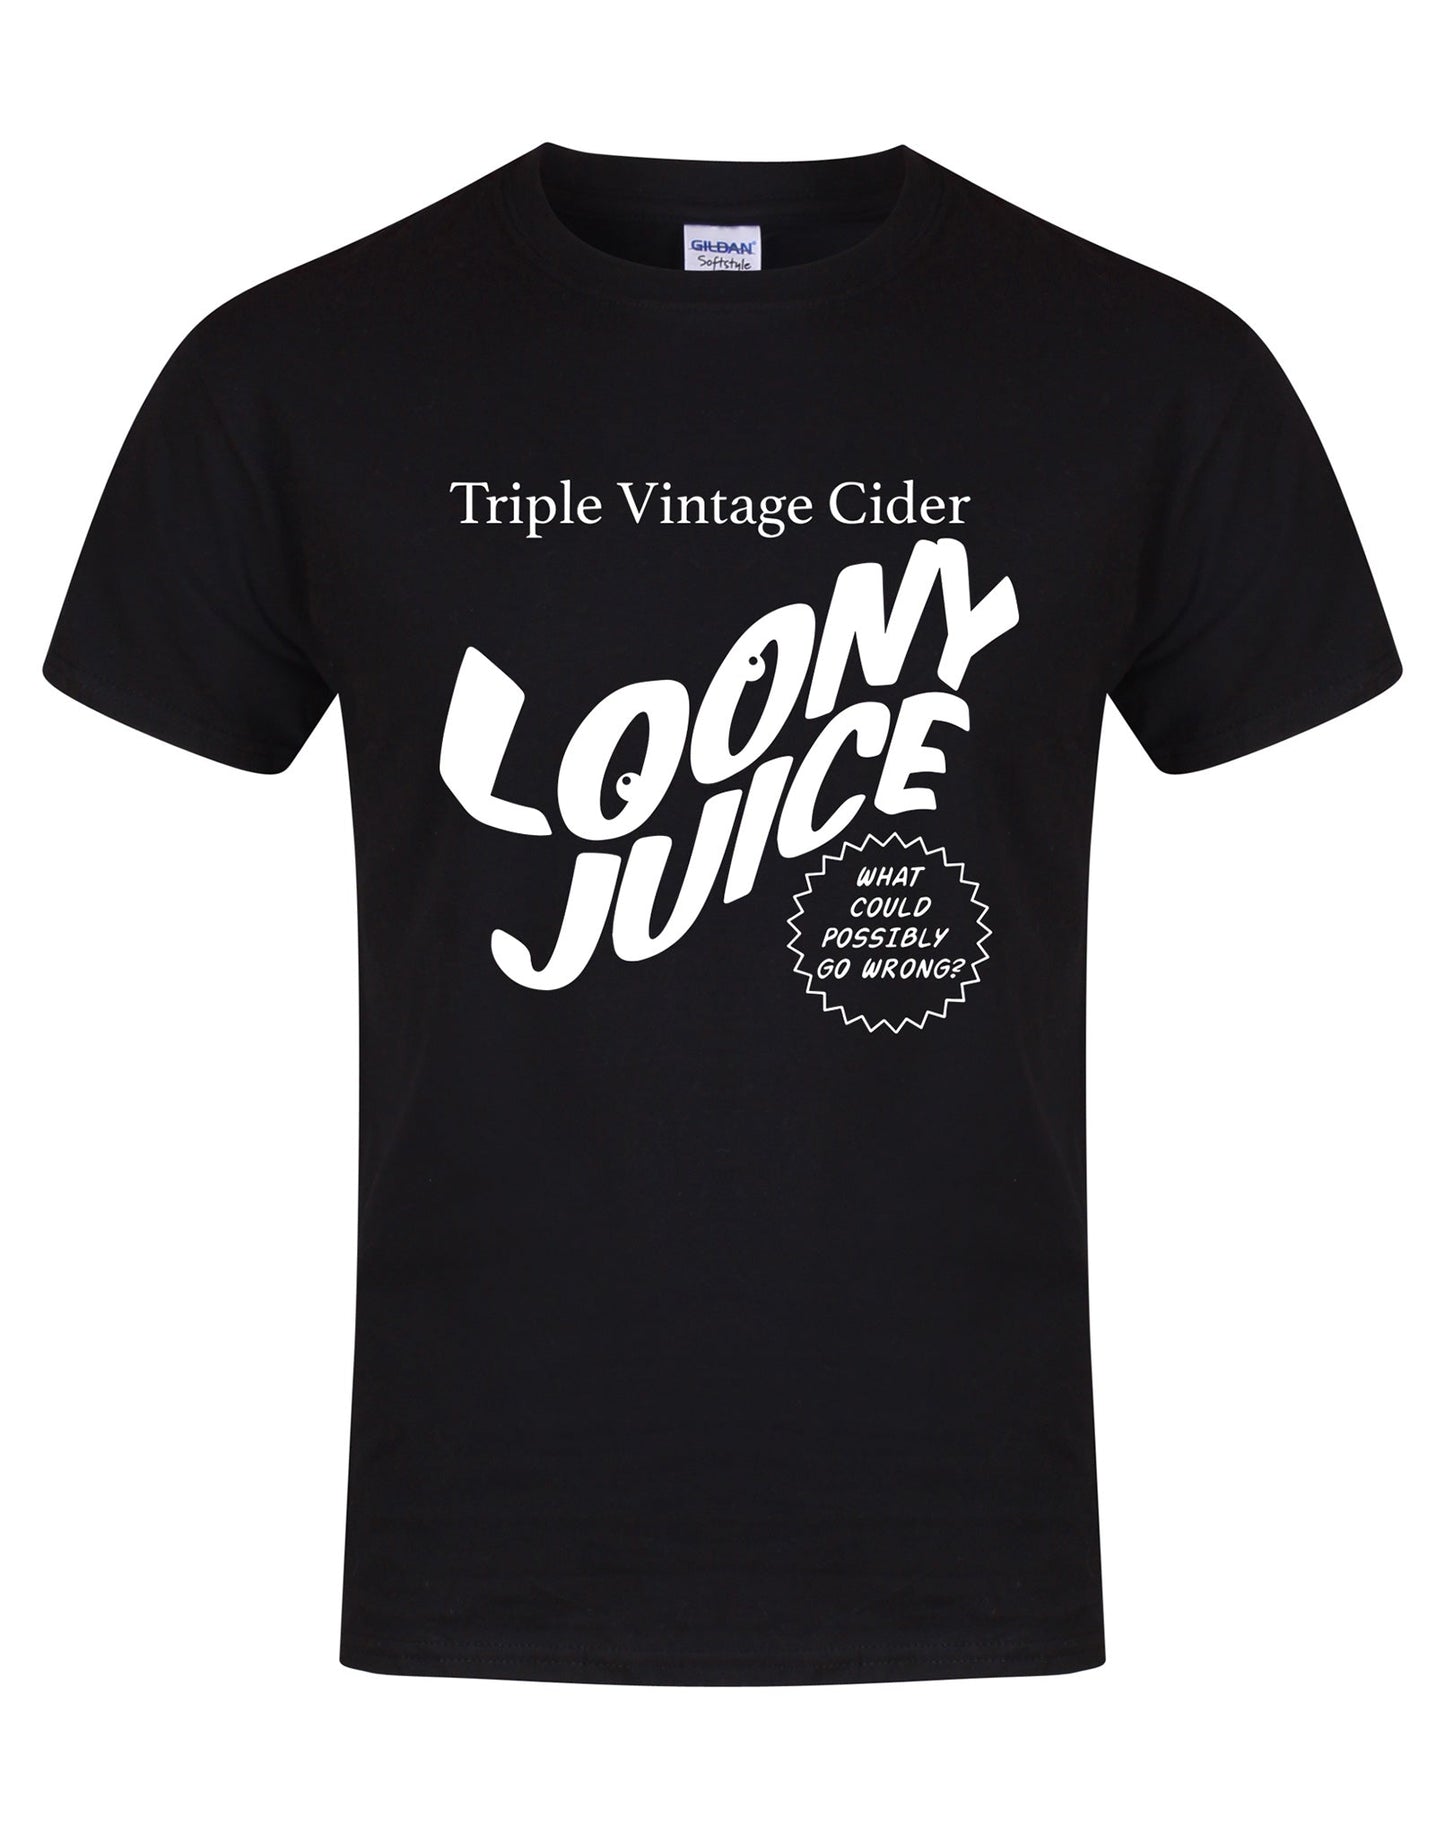 Loony Juice unisex fit T-shirt - various colours - Dirty Stop Outs